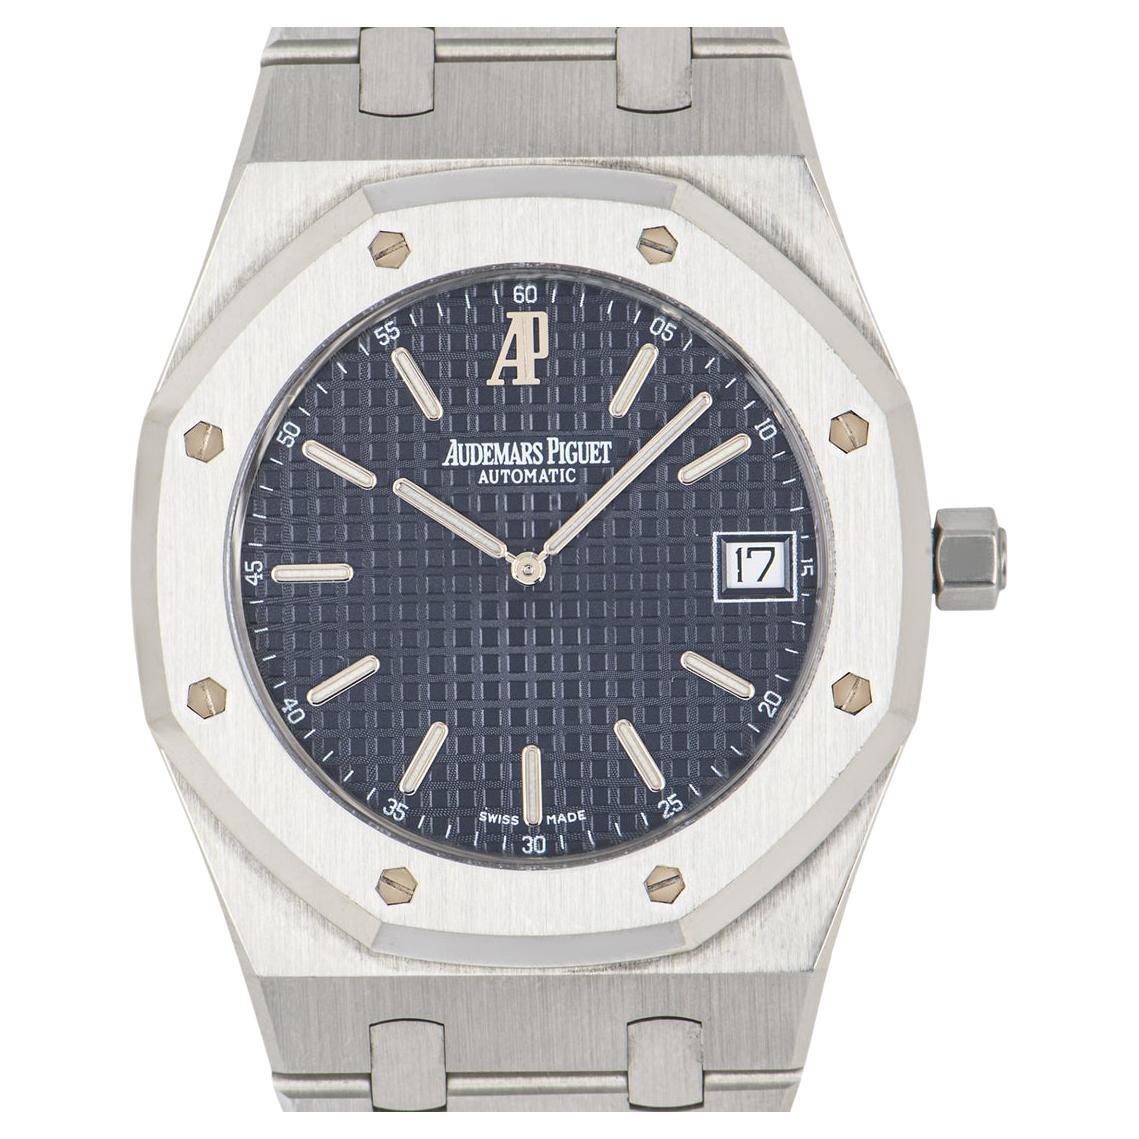 An unworn NOS 39mm stainless steel Royal Oak Jumbo Extra-Thin by Audemars Piguet 15202ST.OO.0944ST.02. This model is an earlier version of the 15202ST's which is easily identified by the AP logo being at 12 o'clock instead of 6 like the newer